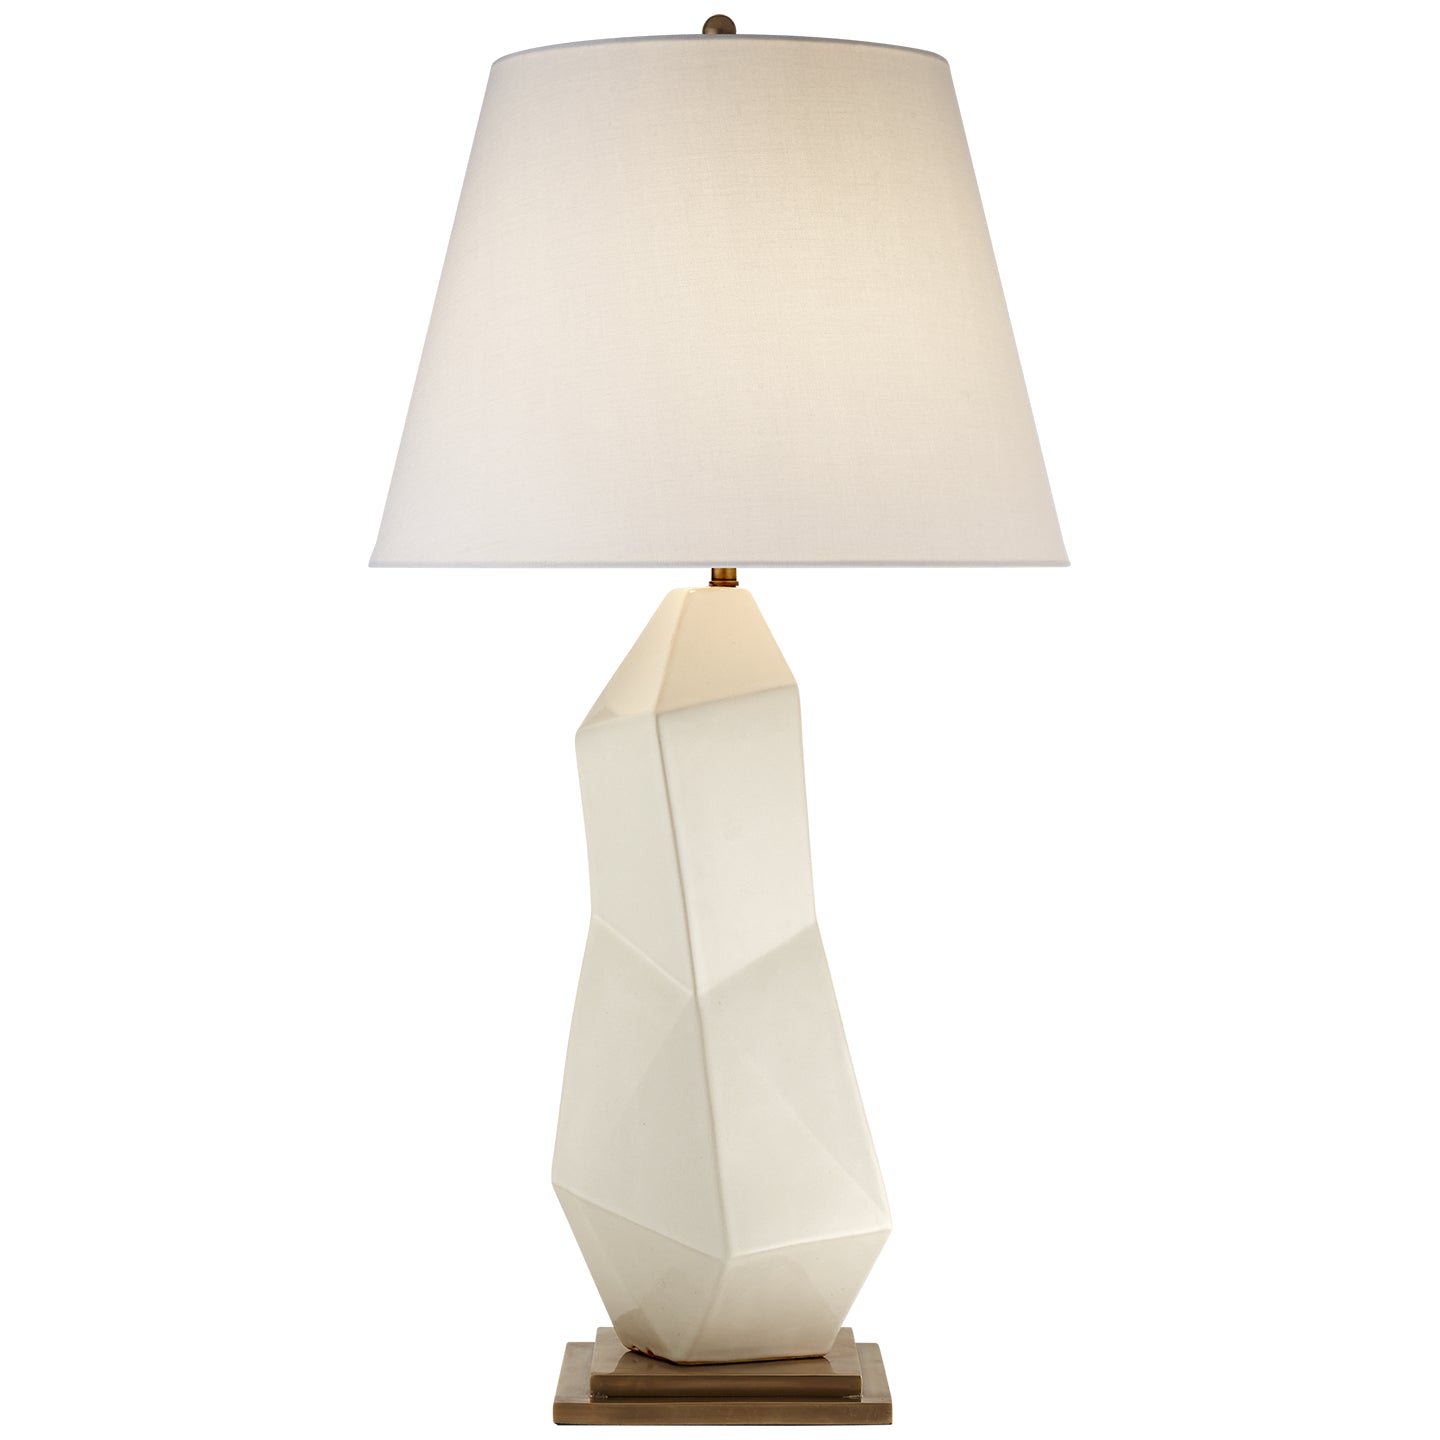 Load image into Gallery viewer, Visual Comfort Signature - KW 3046WLC-L - One Light Table Lamp - Bayliss - White Leather Ceramic
